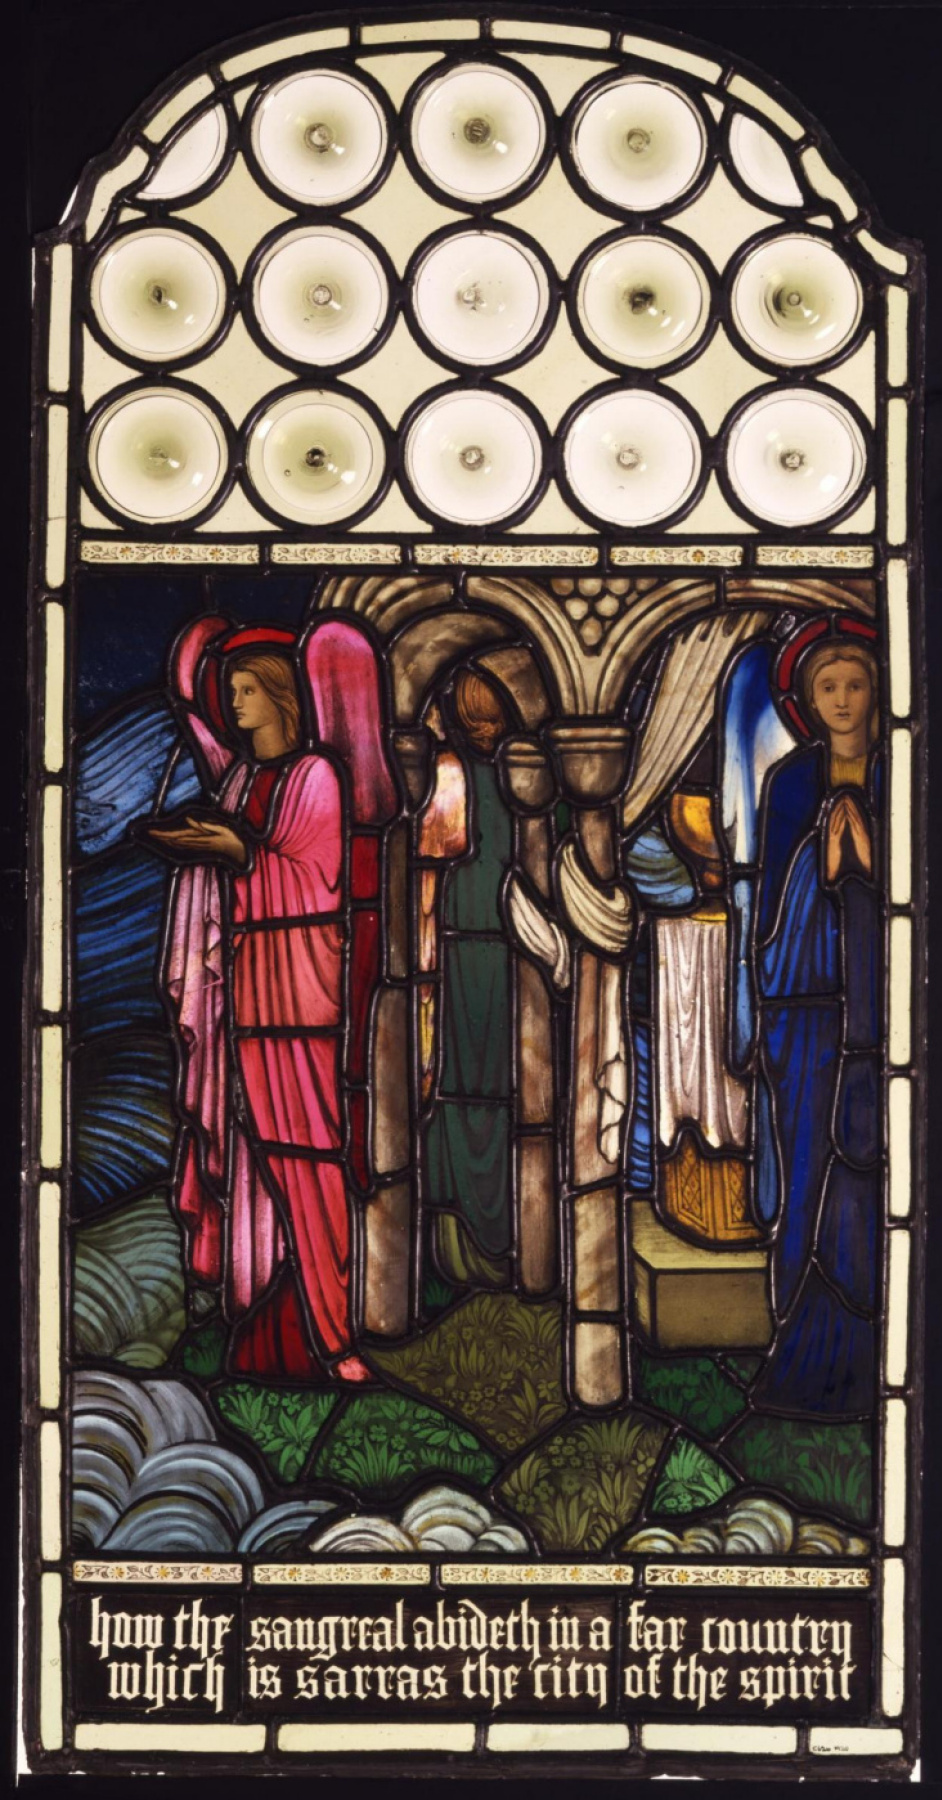 William Morris. Stained-glass window "Angels guarding the Holy Grail" (co-authorship with Edward Burne-Jones)